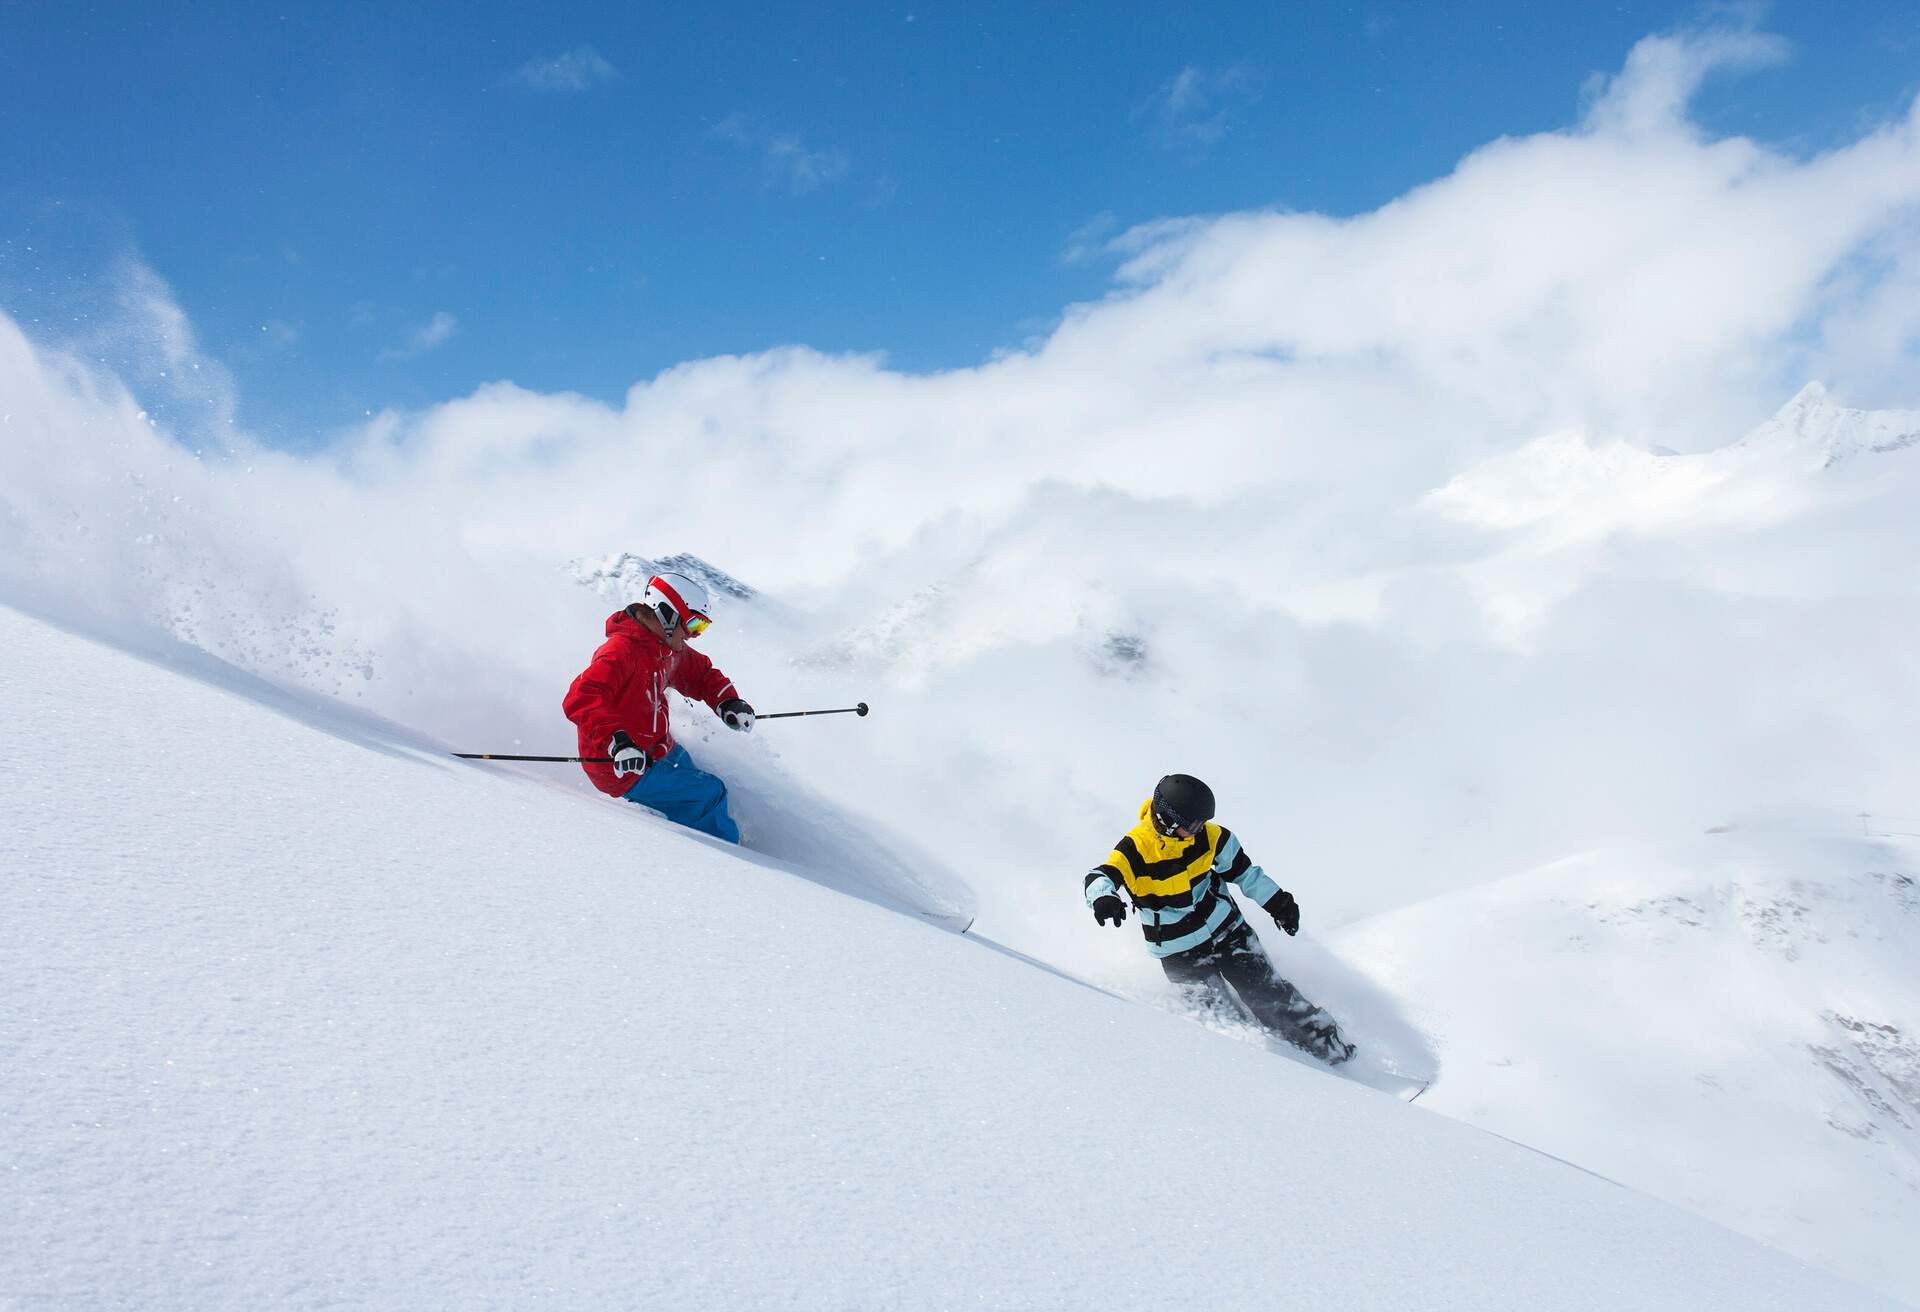 Two skiers side slipping on a snow hill.